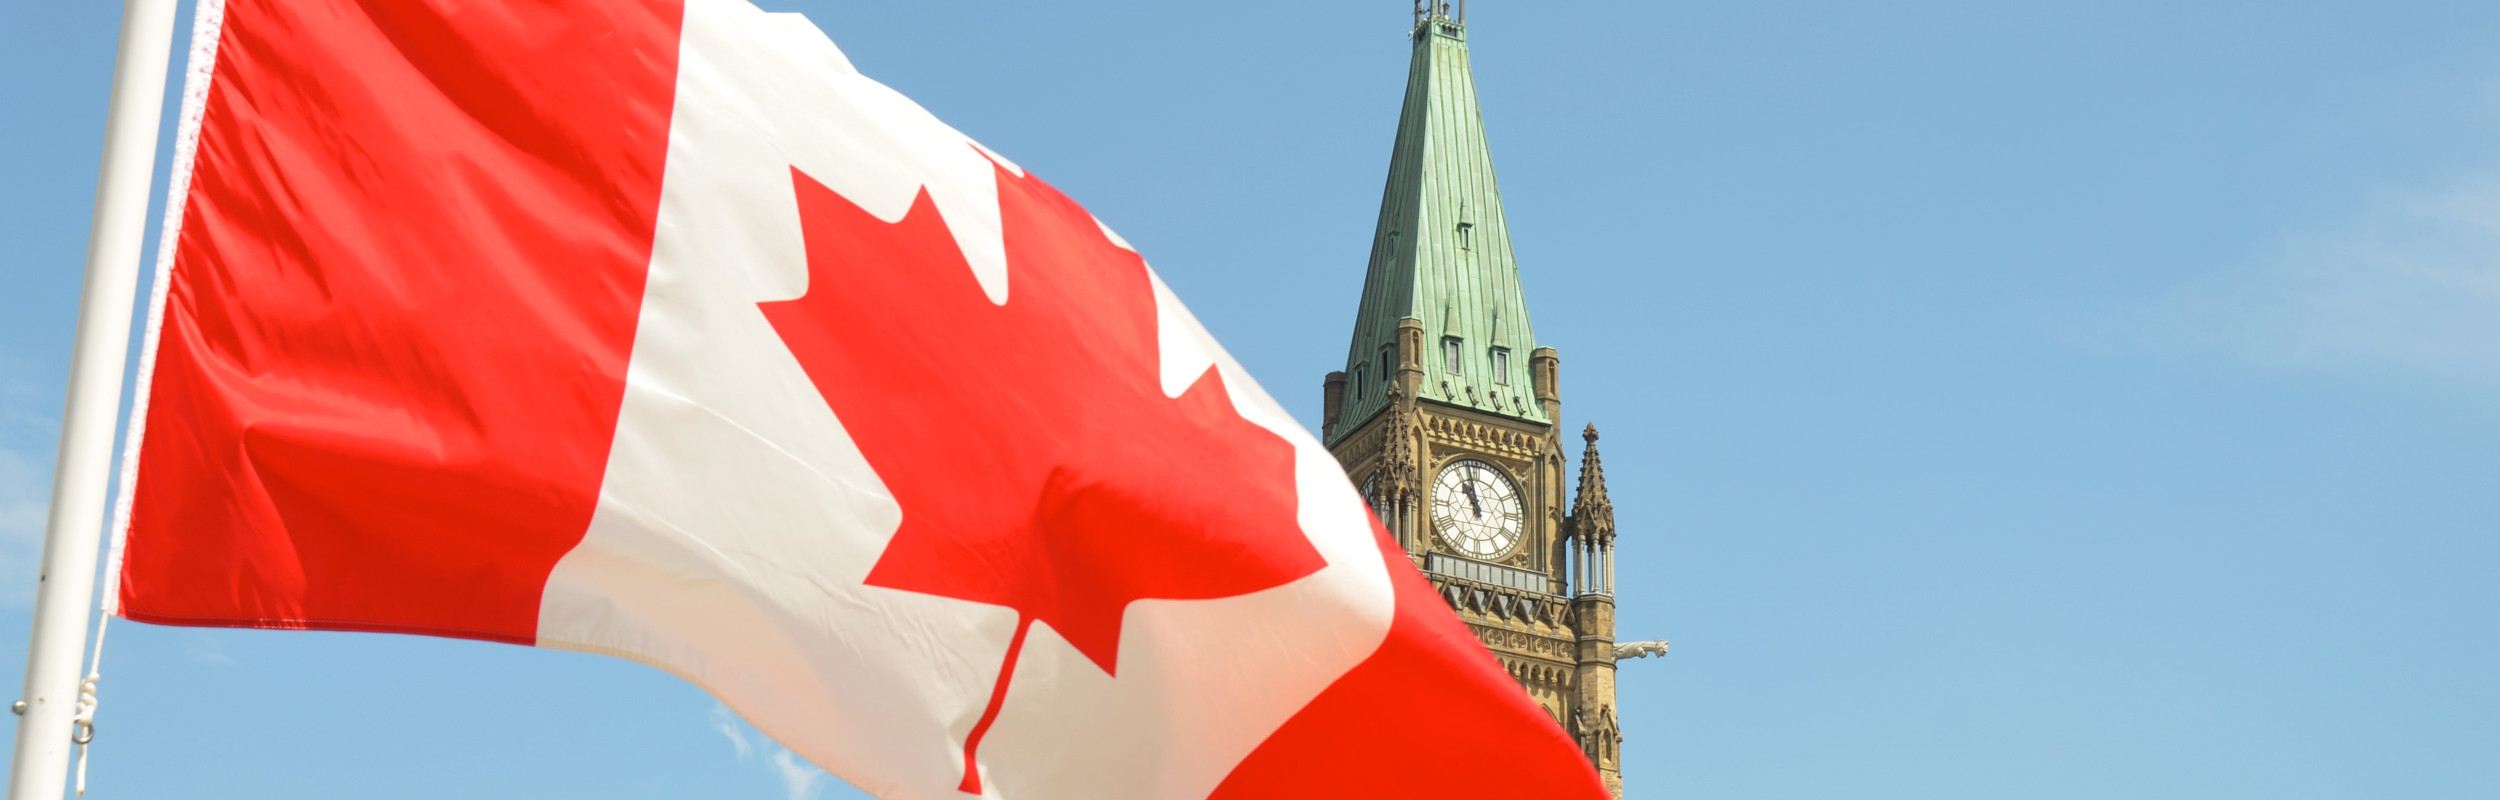 Canadian flag with the Peace Tower of the Parliament building in the background